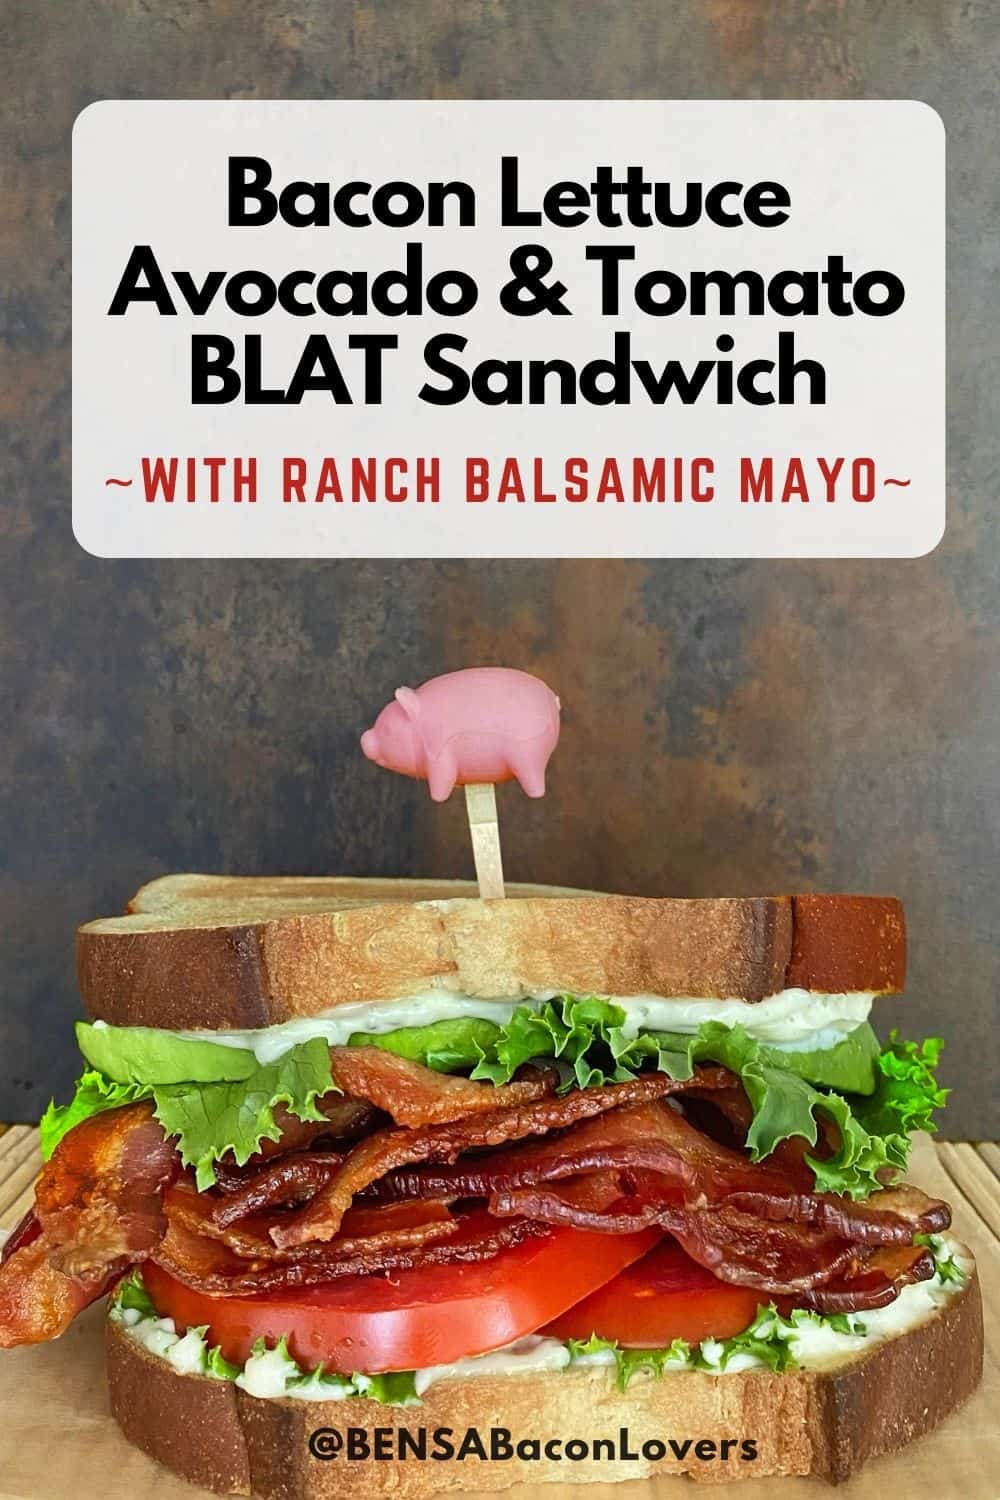 Bacon lettuce avocado and tomato sandwich with ranch balsamic mayo, held together with a pig topped pick